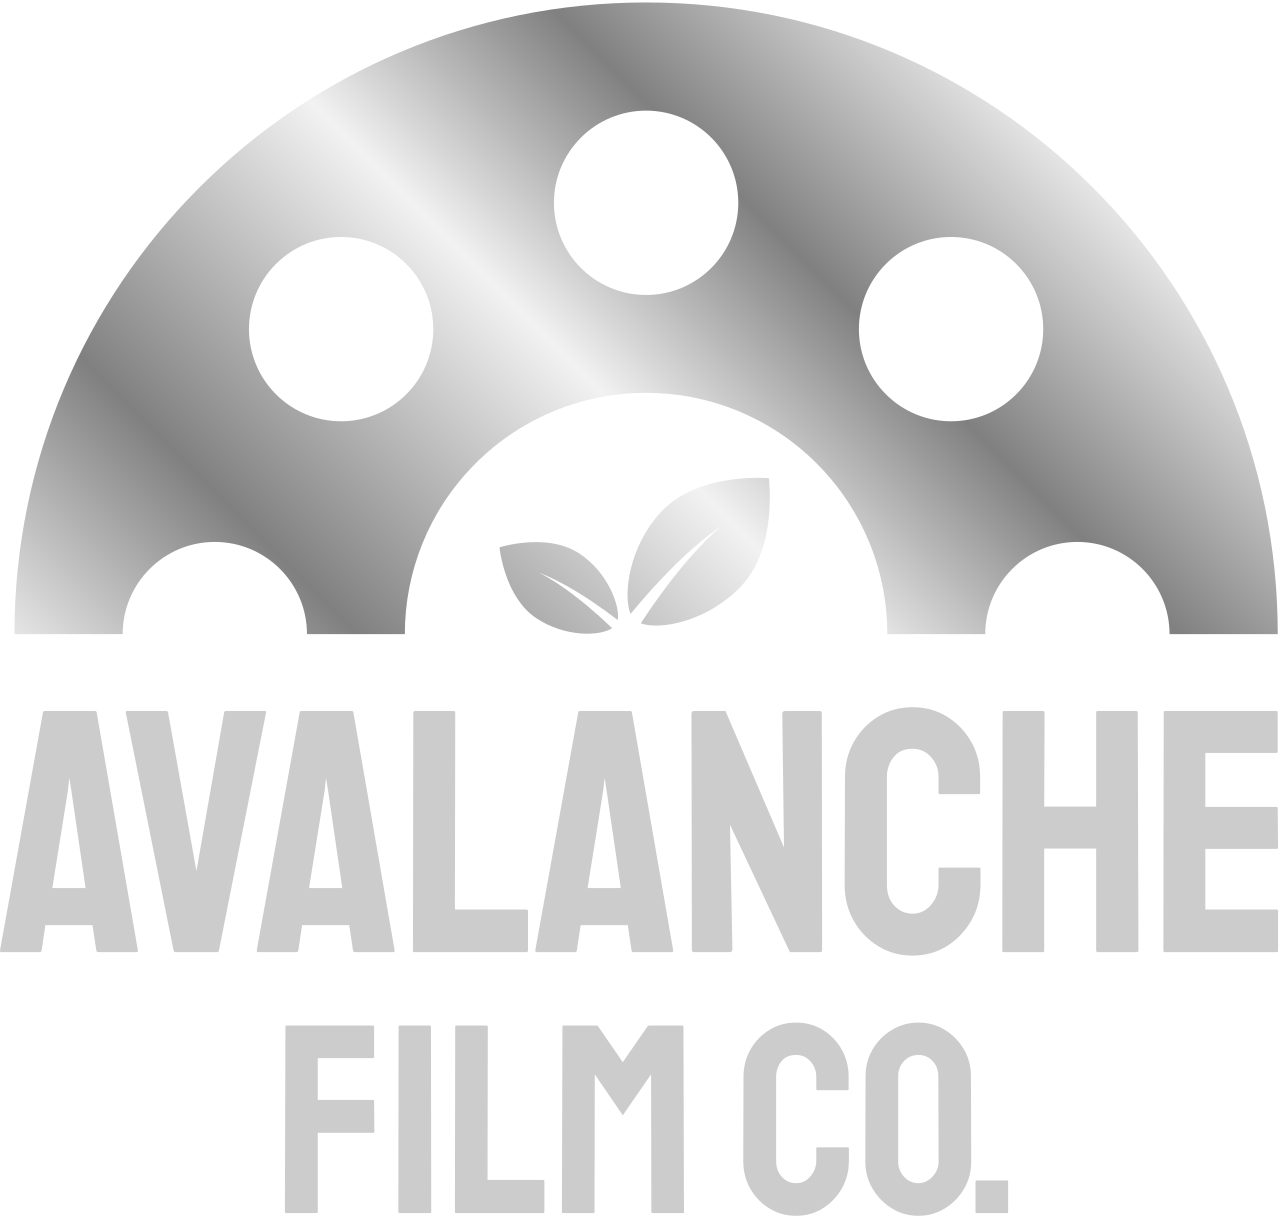 Avalanche's web page